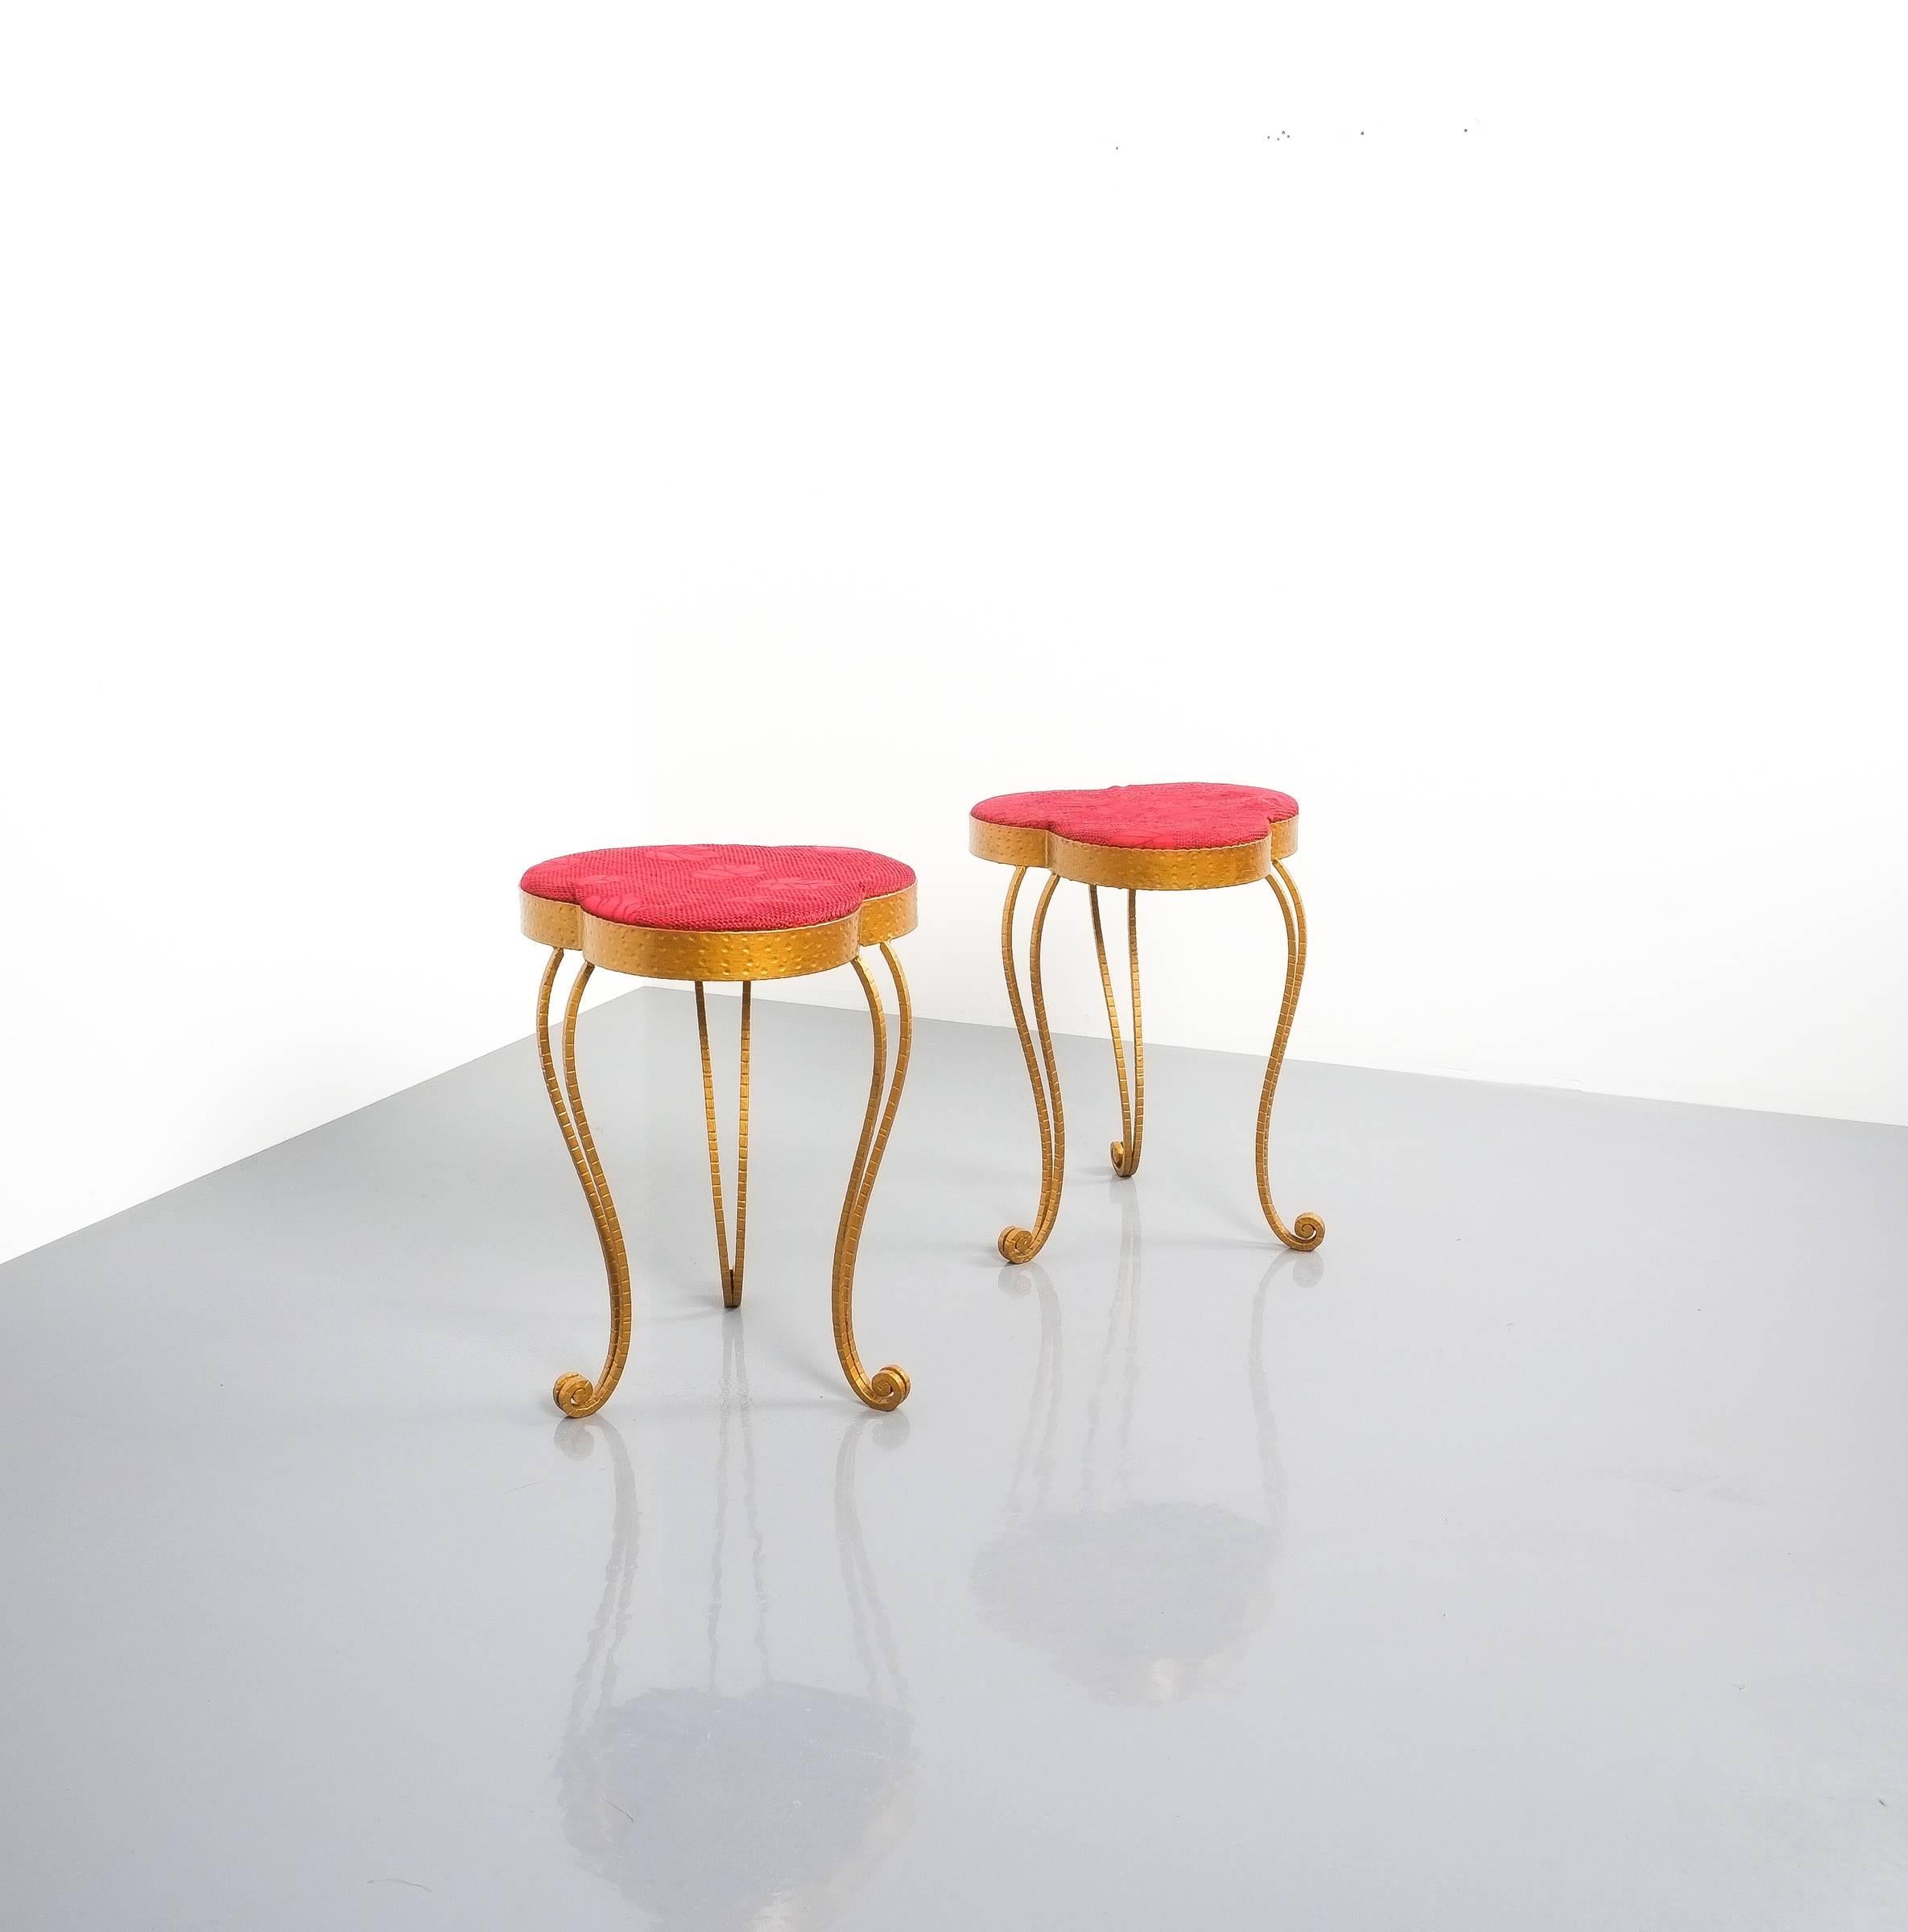 Pair of Pier Luigi Colli gold iron clover stools with red fabric, Italy, 1950. Hammered gilt iron stools with red velvet-ish fabric in good condition. 
 